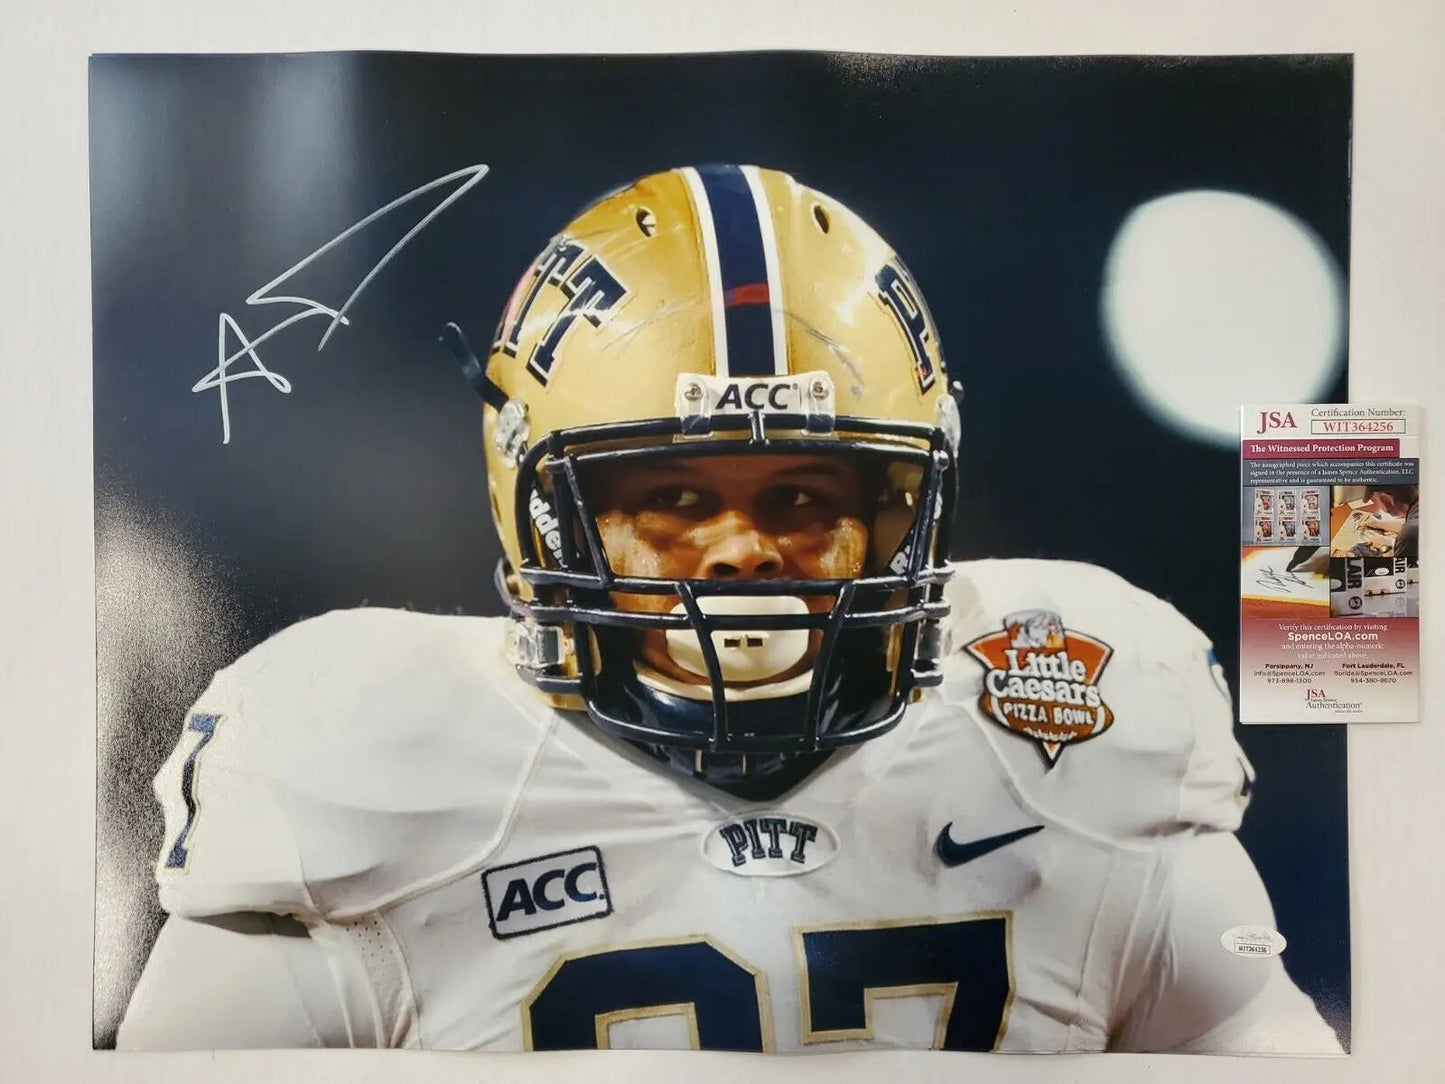 MVP Authentics Aaron Donald Autographed Signed Pittsburgh Panthers 16X20 Photo Jsa  Coa 170.10 sports jersey framing , jersey framing